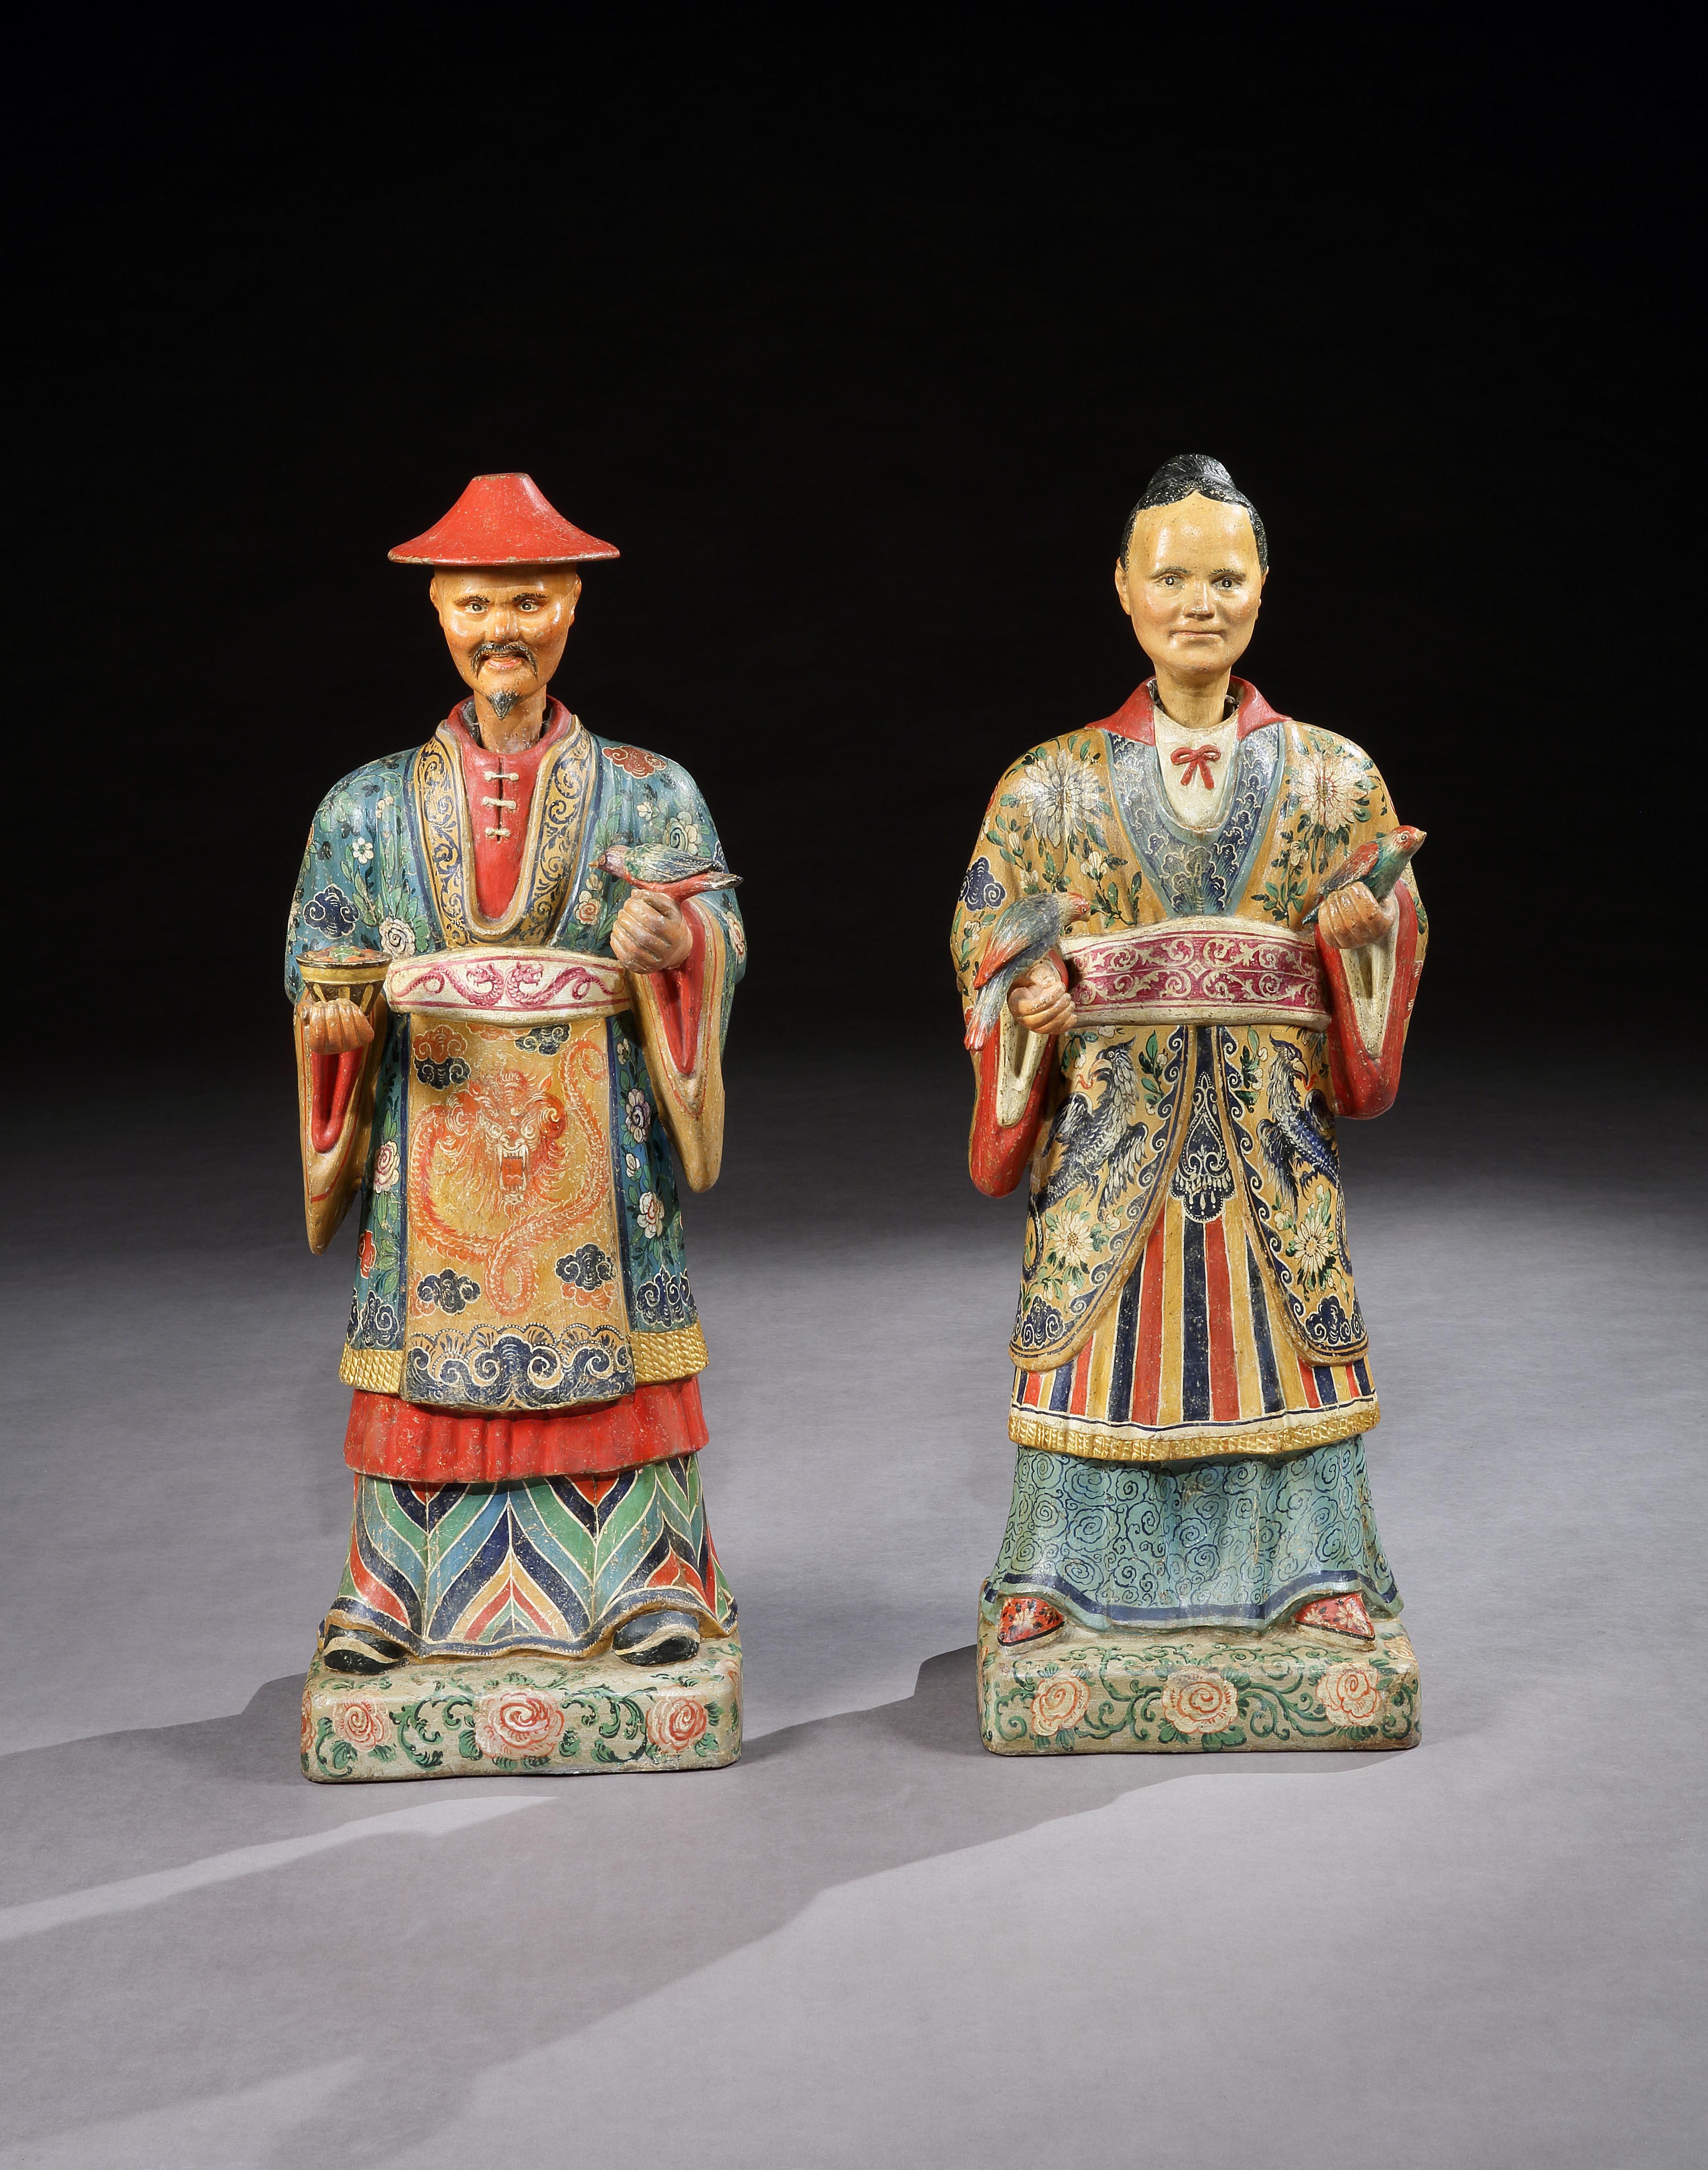 A rare pair of 19th century North Italian painted polychrome figures well modelled and decorated in brightly colored traditional garb.

The lady holding a bird in each hand, the man holding a bird and fruit filled basket, probably

depicting